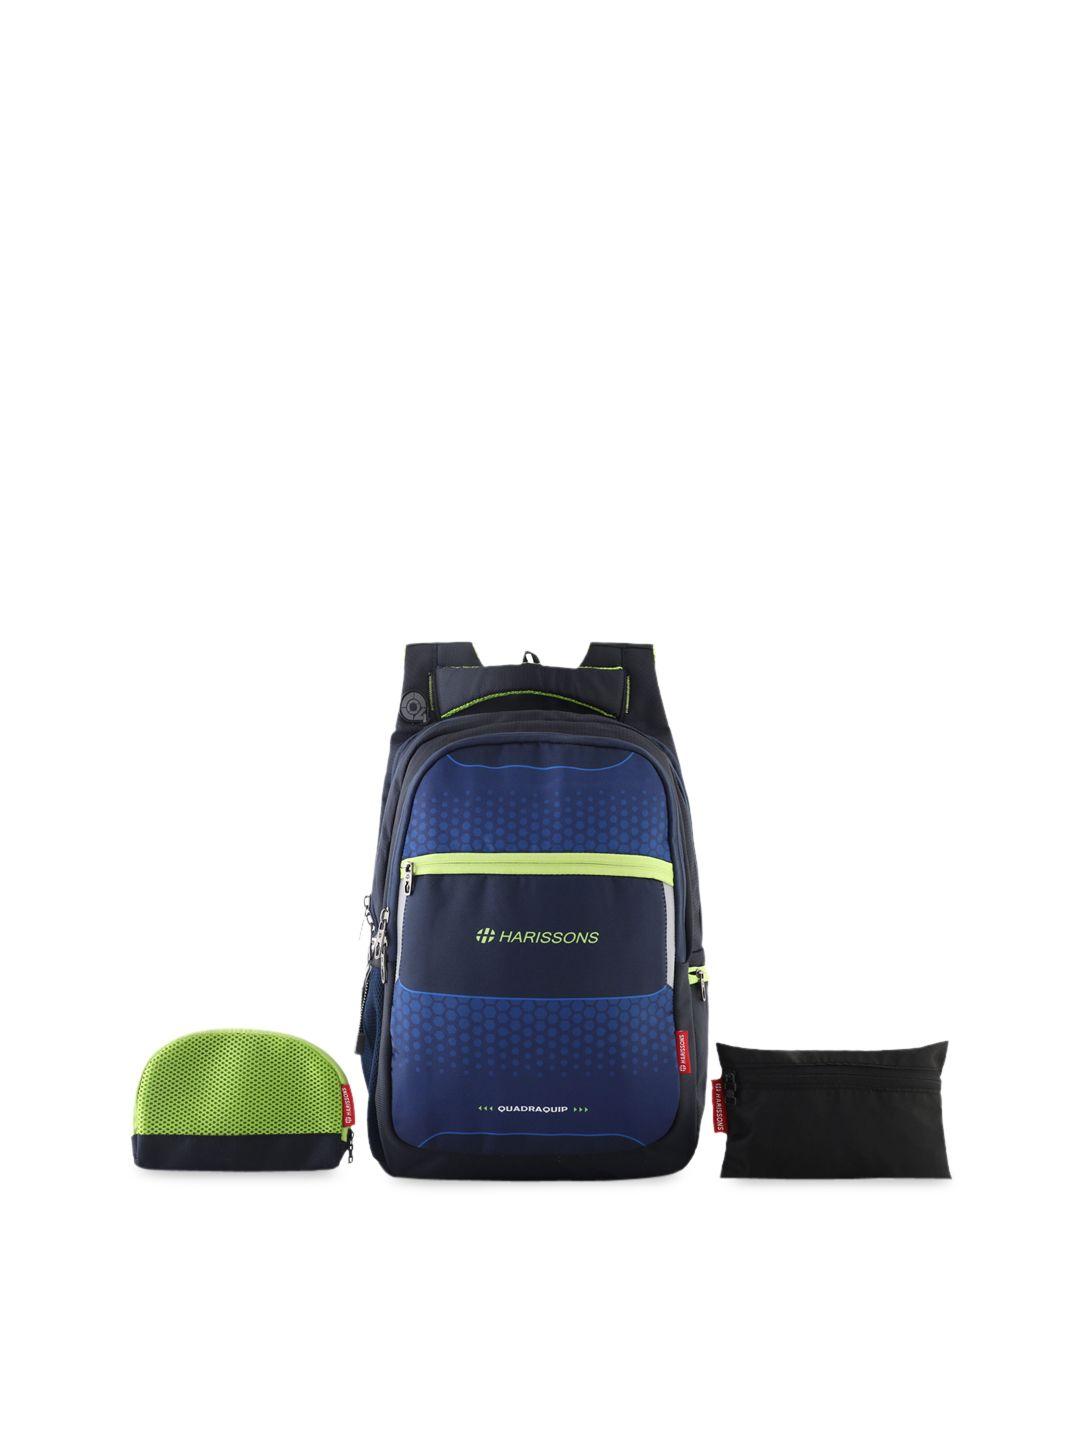 harissons unisex navy blue geometric with reflective strip backpack